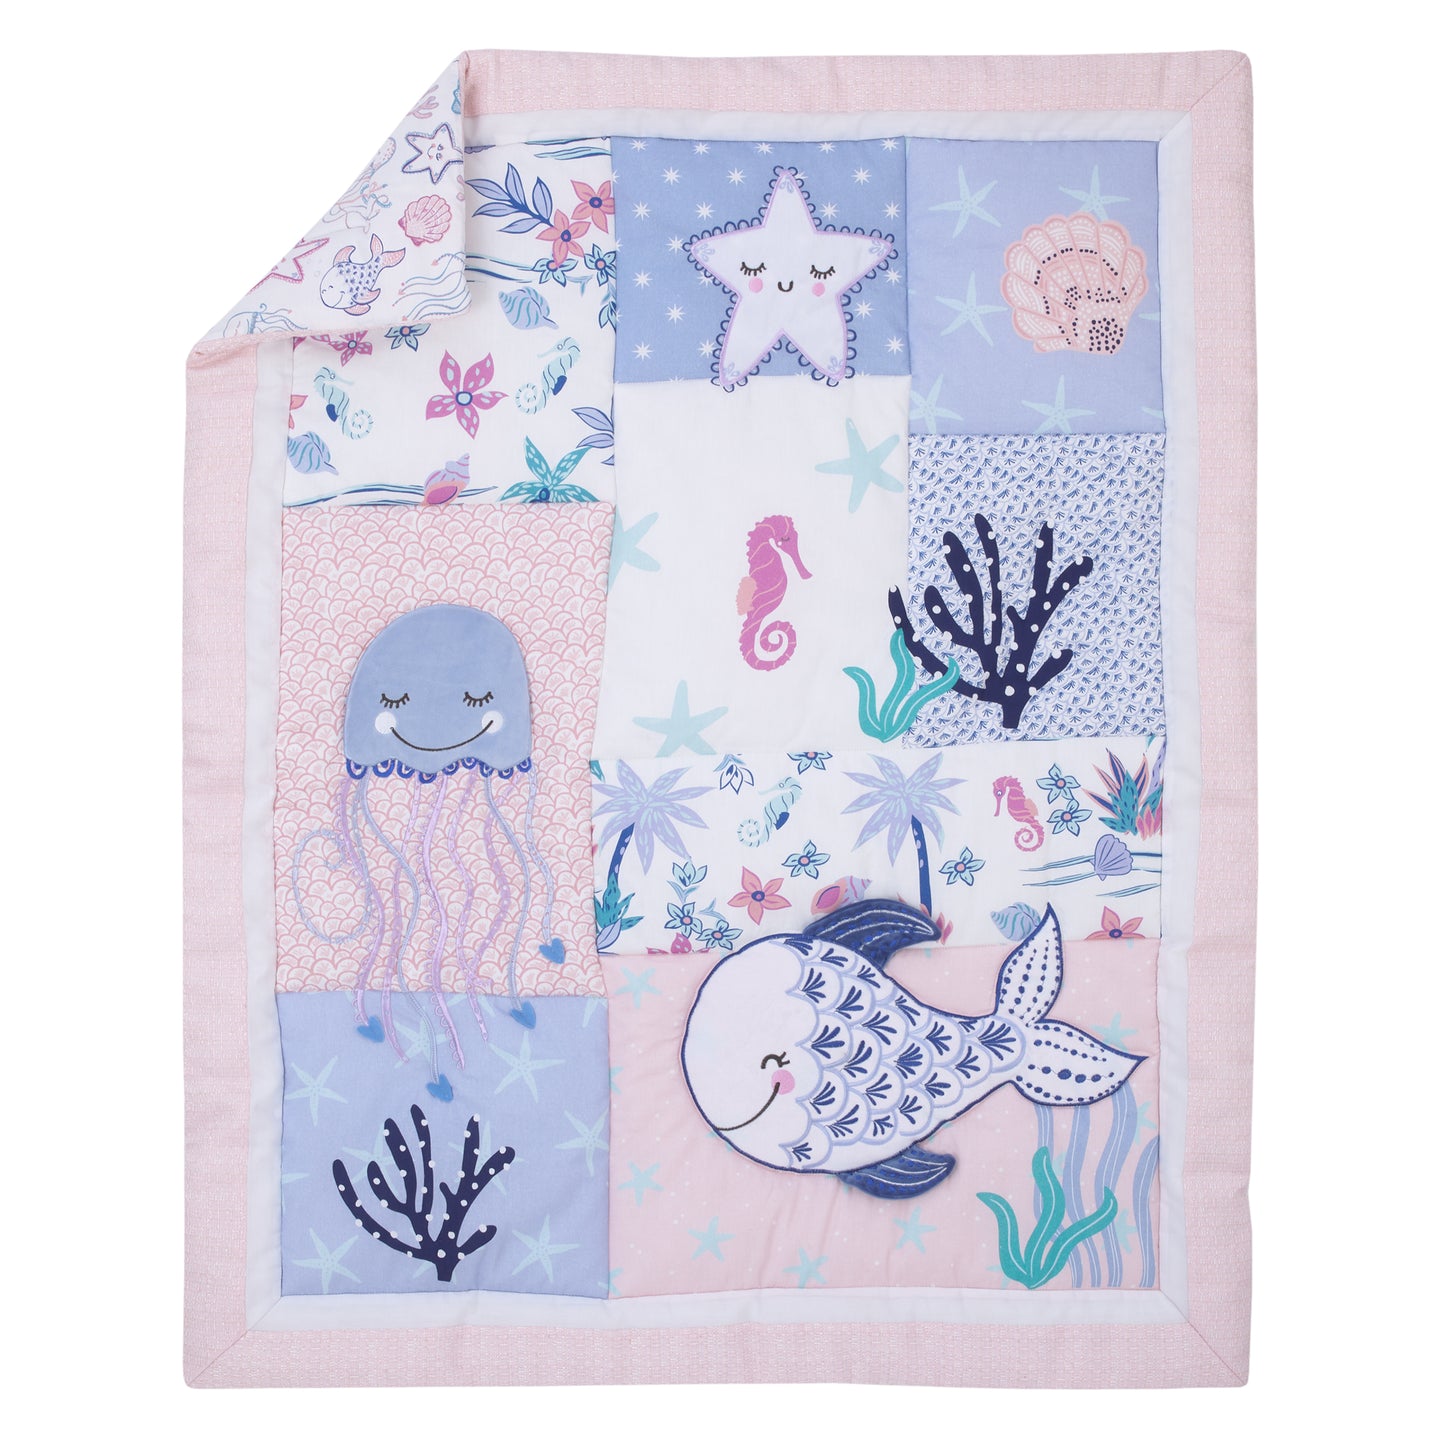 NoJo Mermaid Lagoon Pink, Blue and White Undersea Friends, Fish, Coral, Jellyfish and Starfish 4 Piece Nursery Crib Bedding Set - Comforter, 100% Cotton Fitted Crib Sheet, Crib Skirt, and Storage Caddy